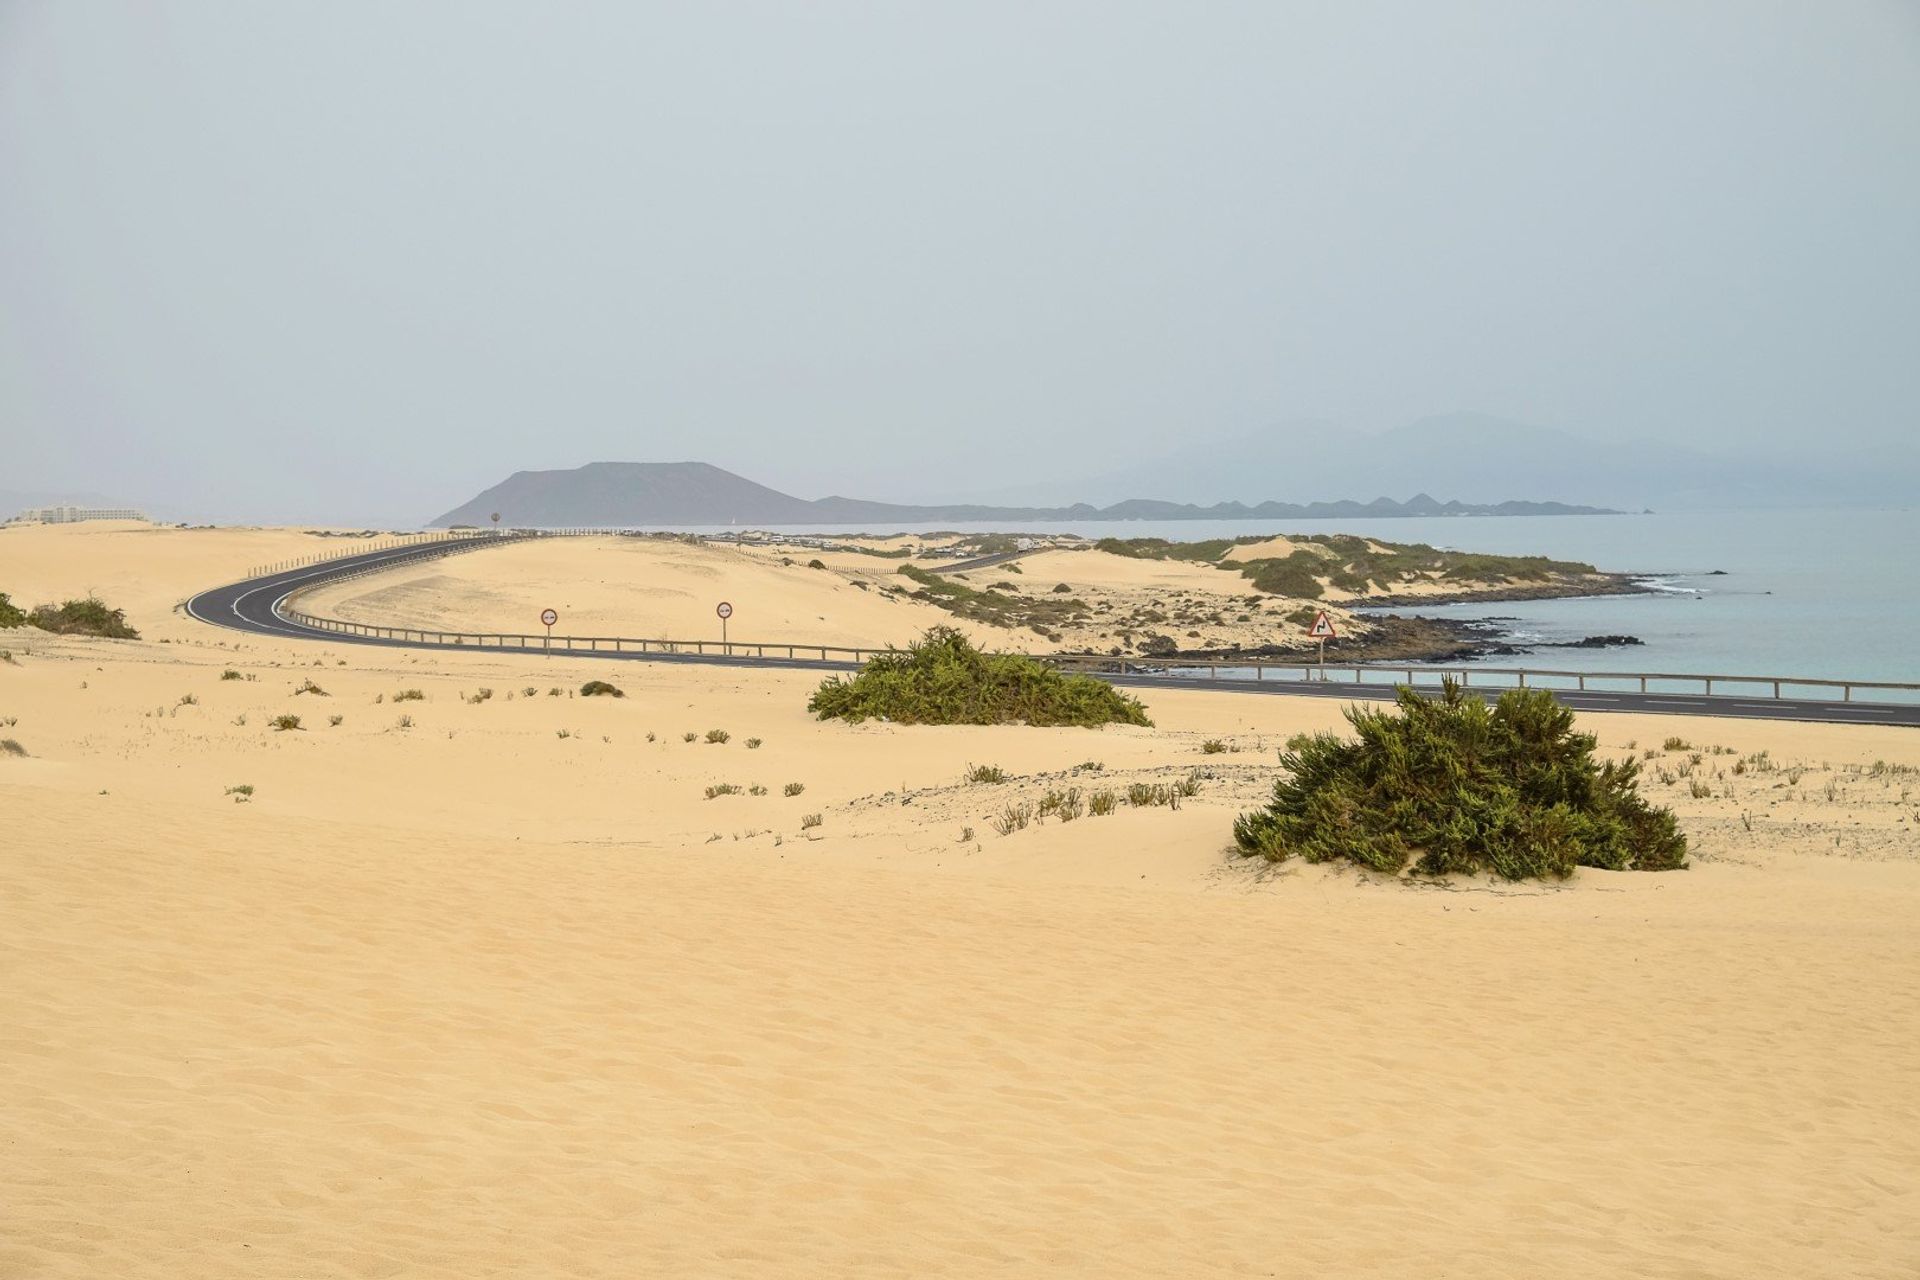 Views of Corralejo Natural Park with its sand dunes and winding road